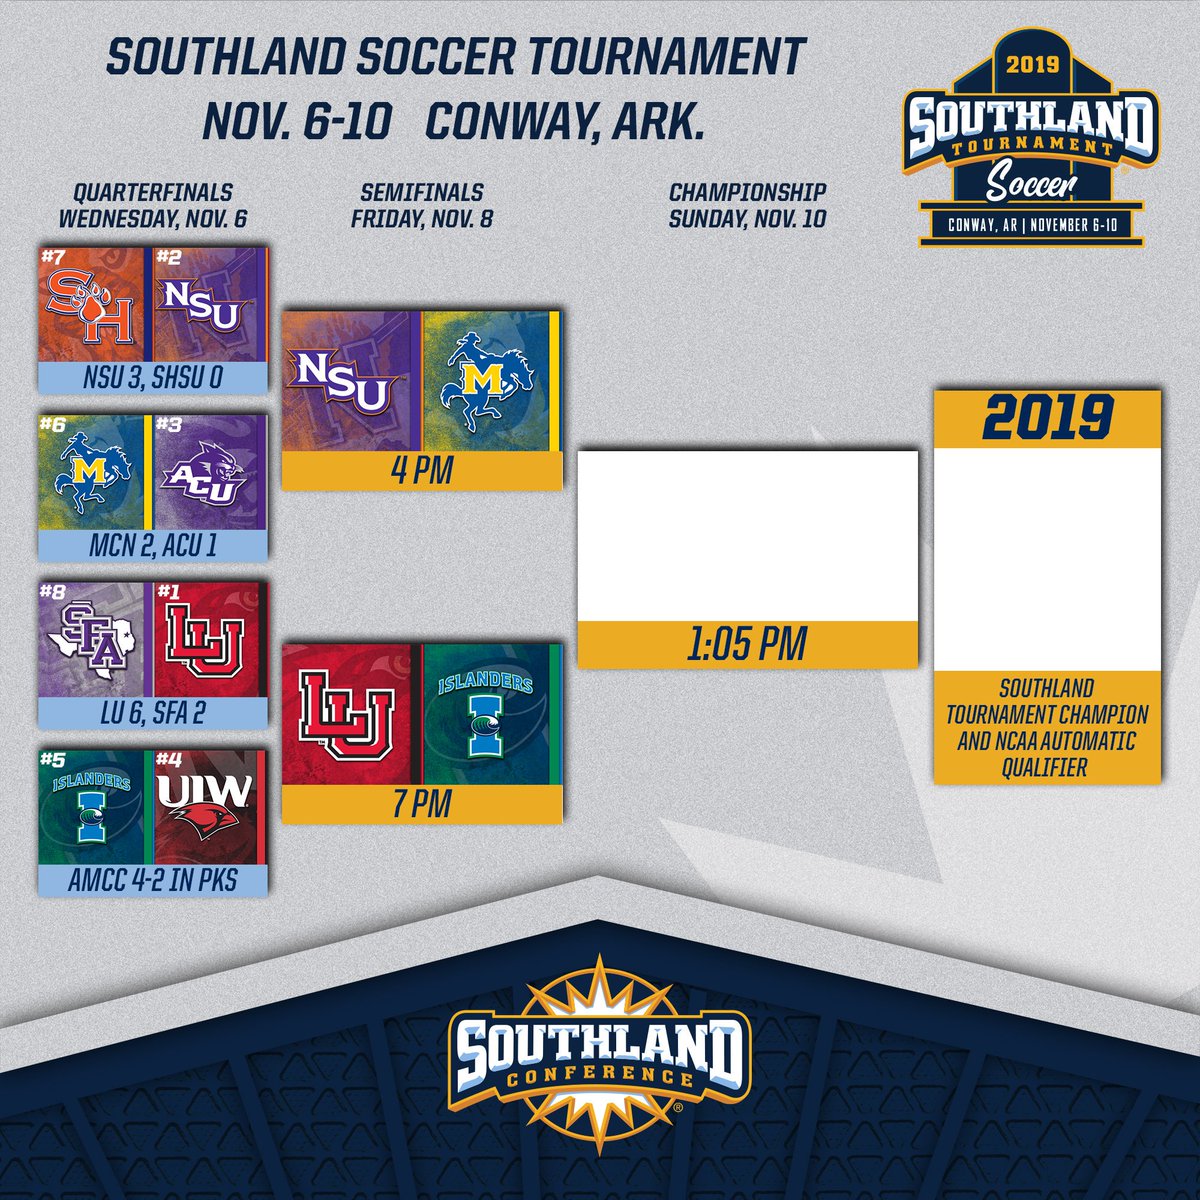 Here's the updated bracket after Wednesday's quarterfinal round! #SouthlandStrong